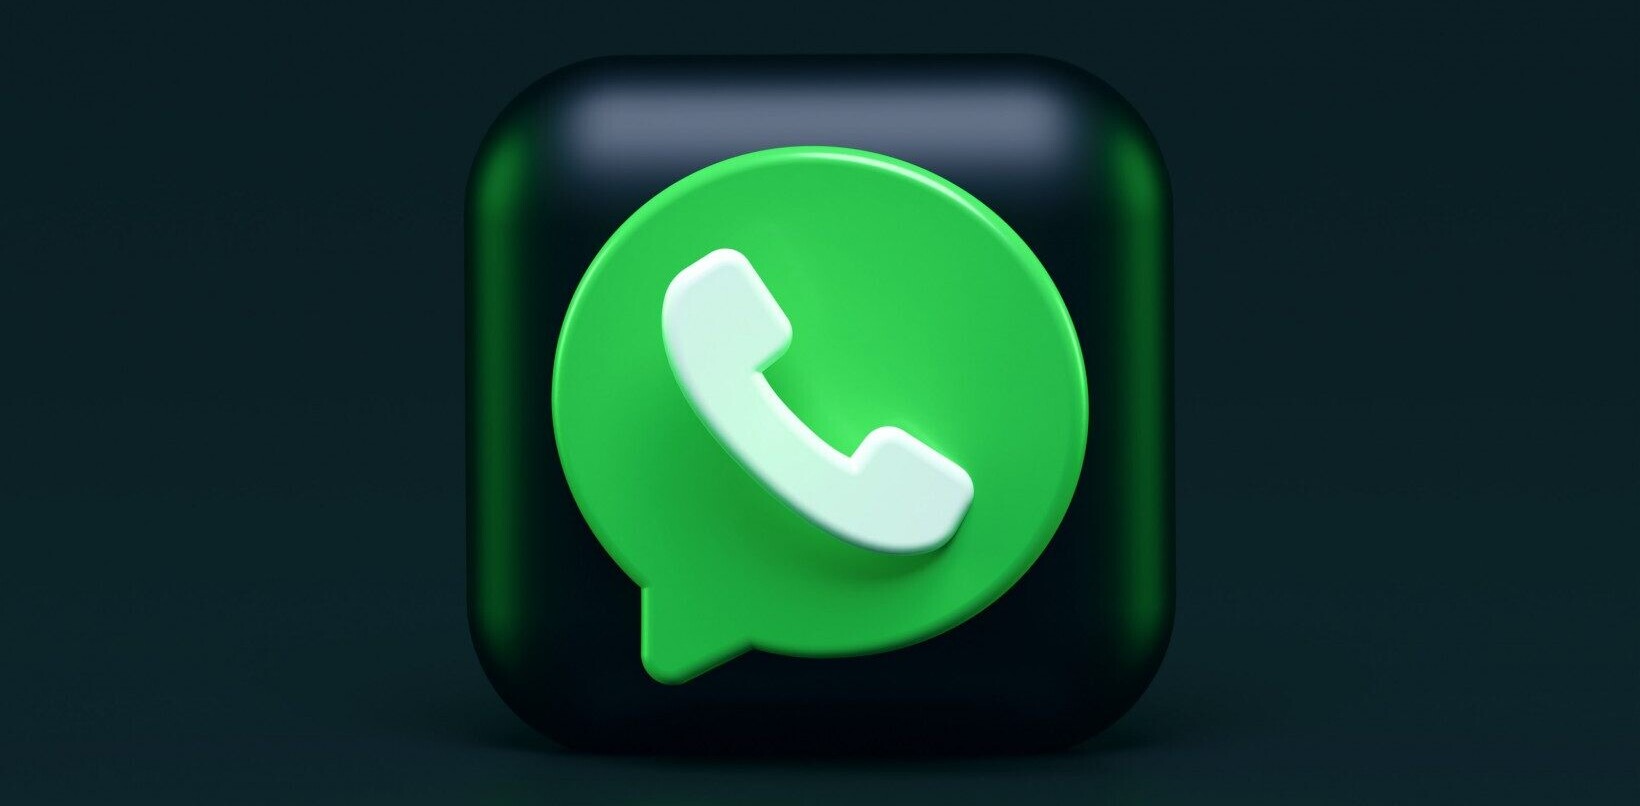 WhatsApp’s new button will let you join calls directly from the group